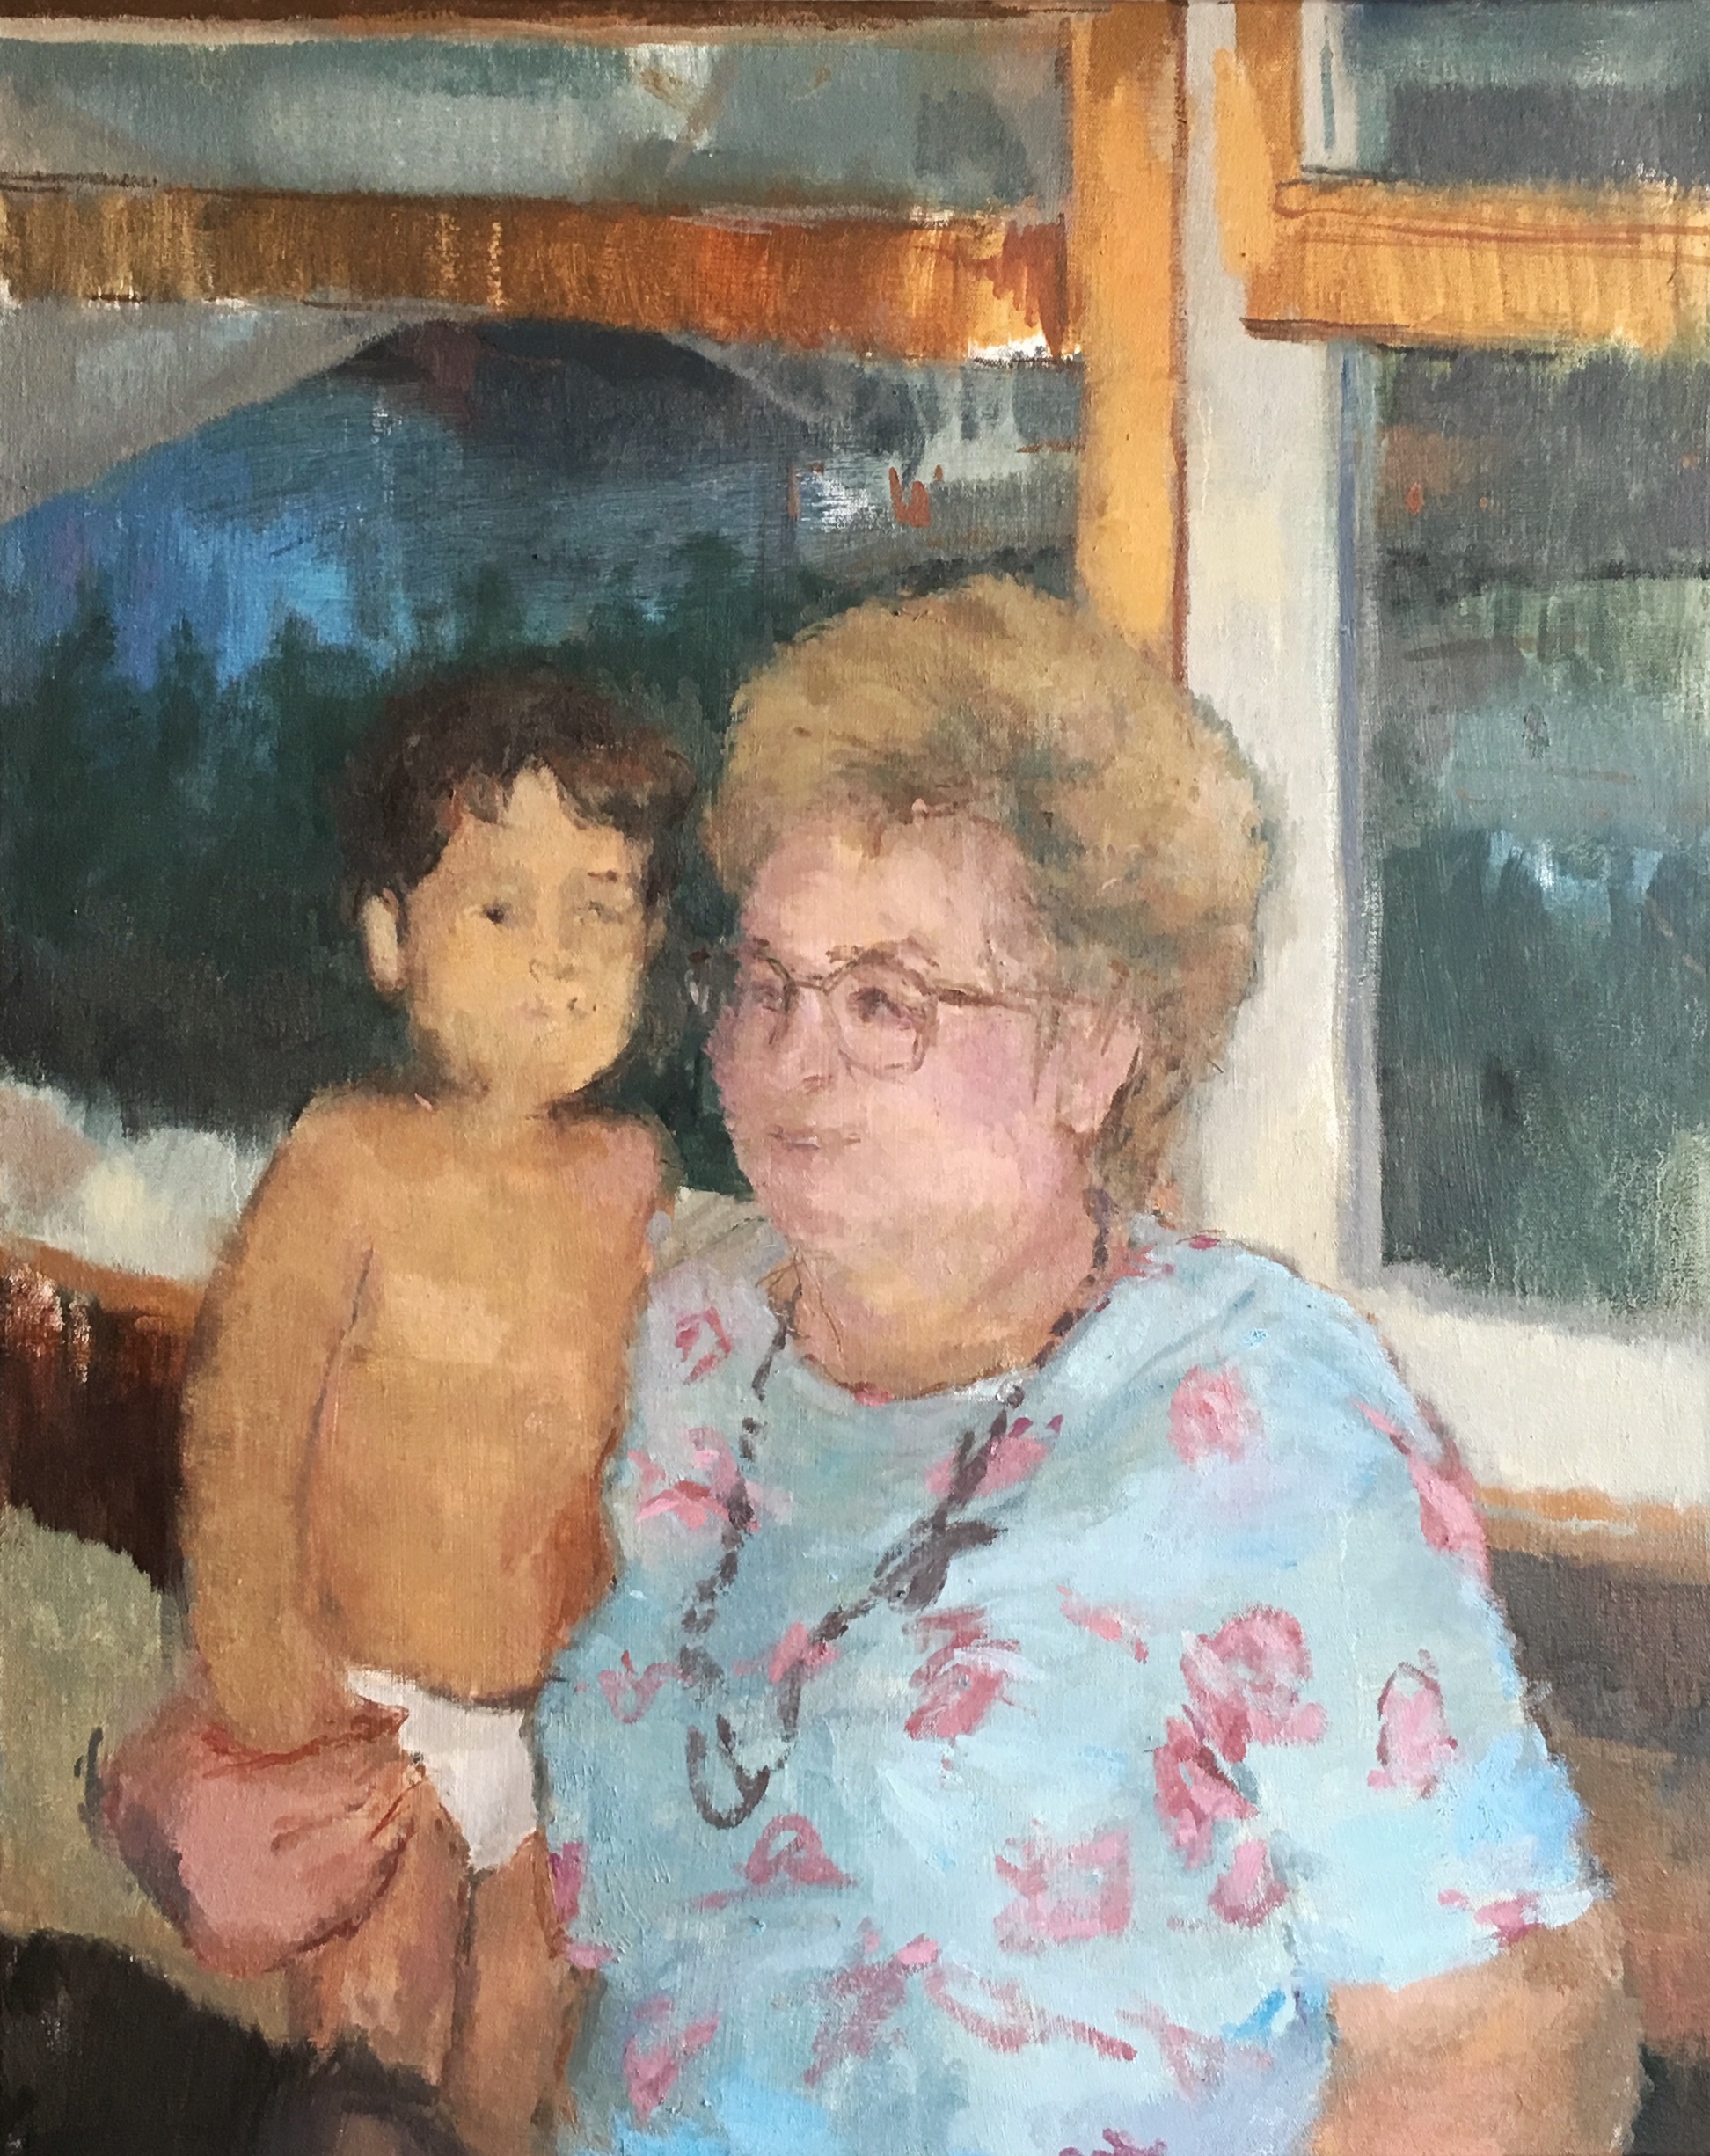    Aunt Barbara     oil on canvas 24x30" 2015  private collection New Jersey 